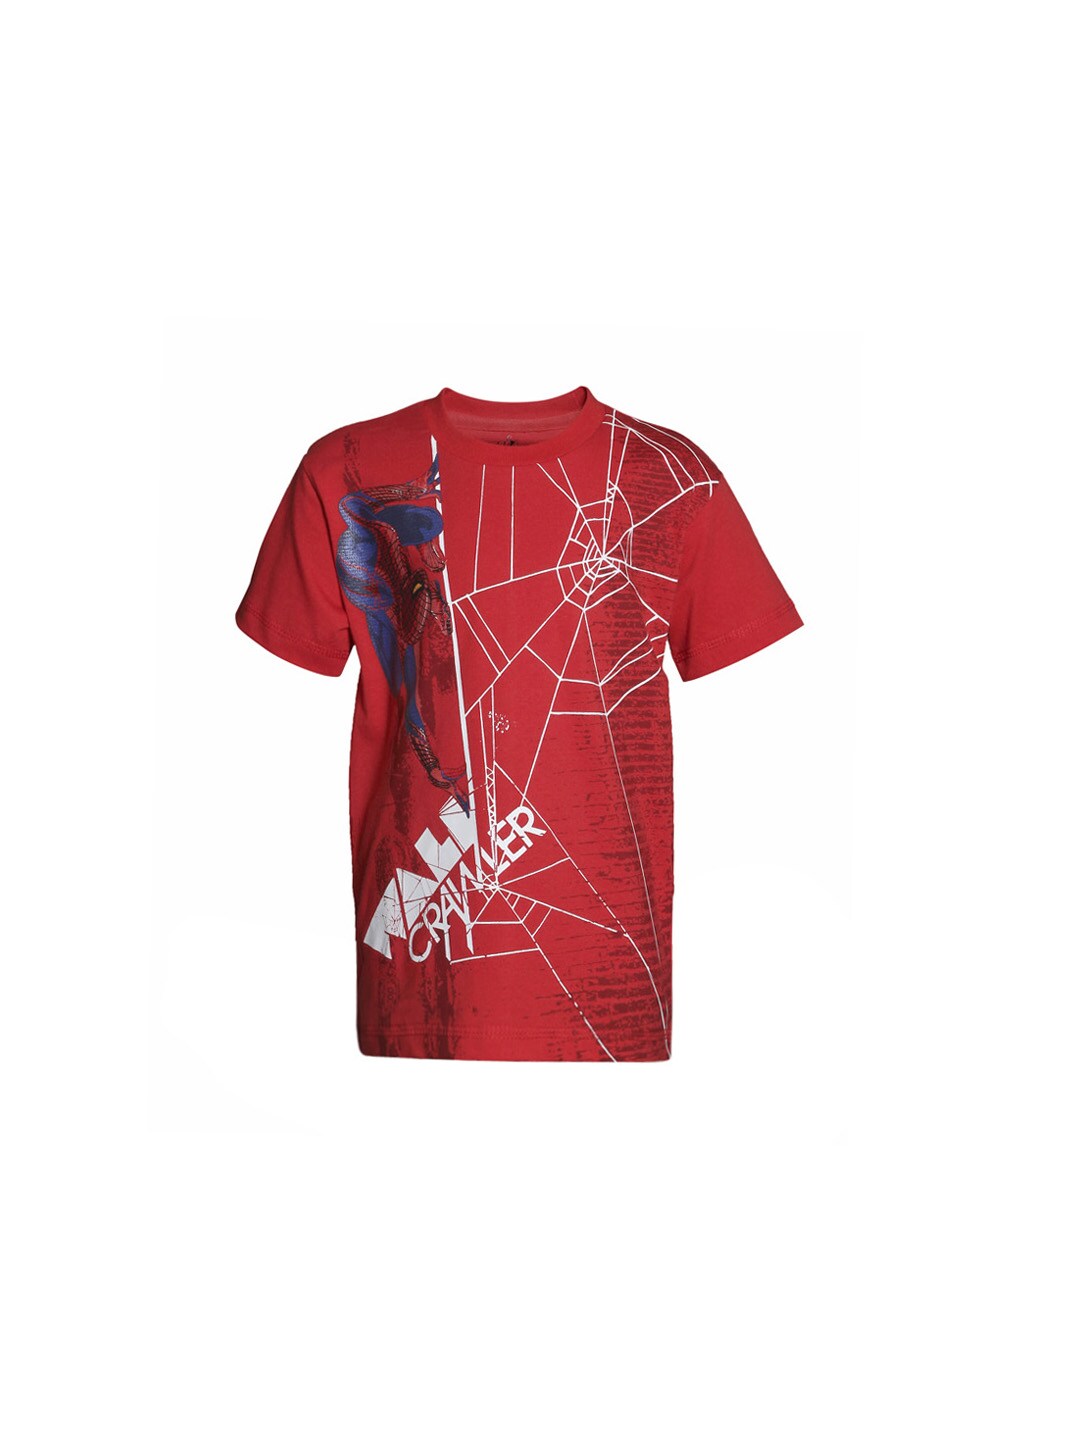 The Amazing Spiderman Boys Red T-Shirt